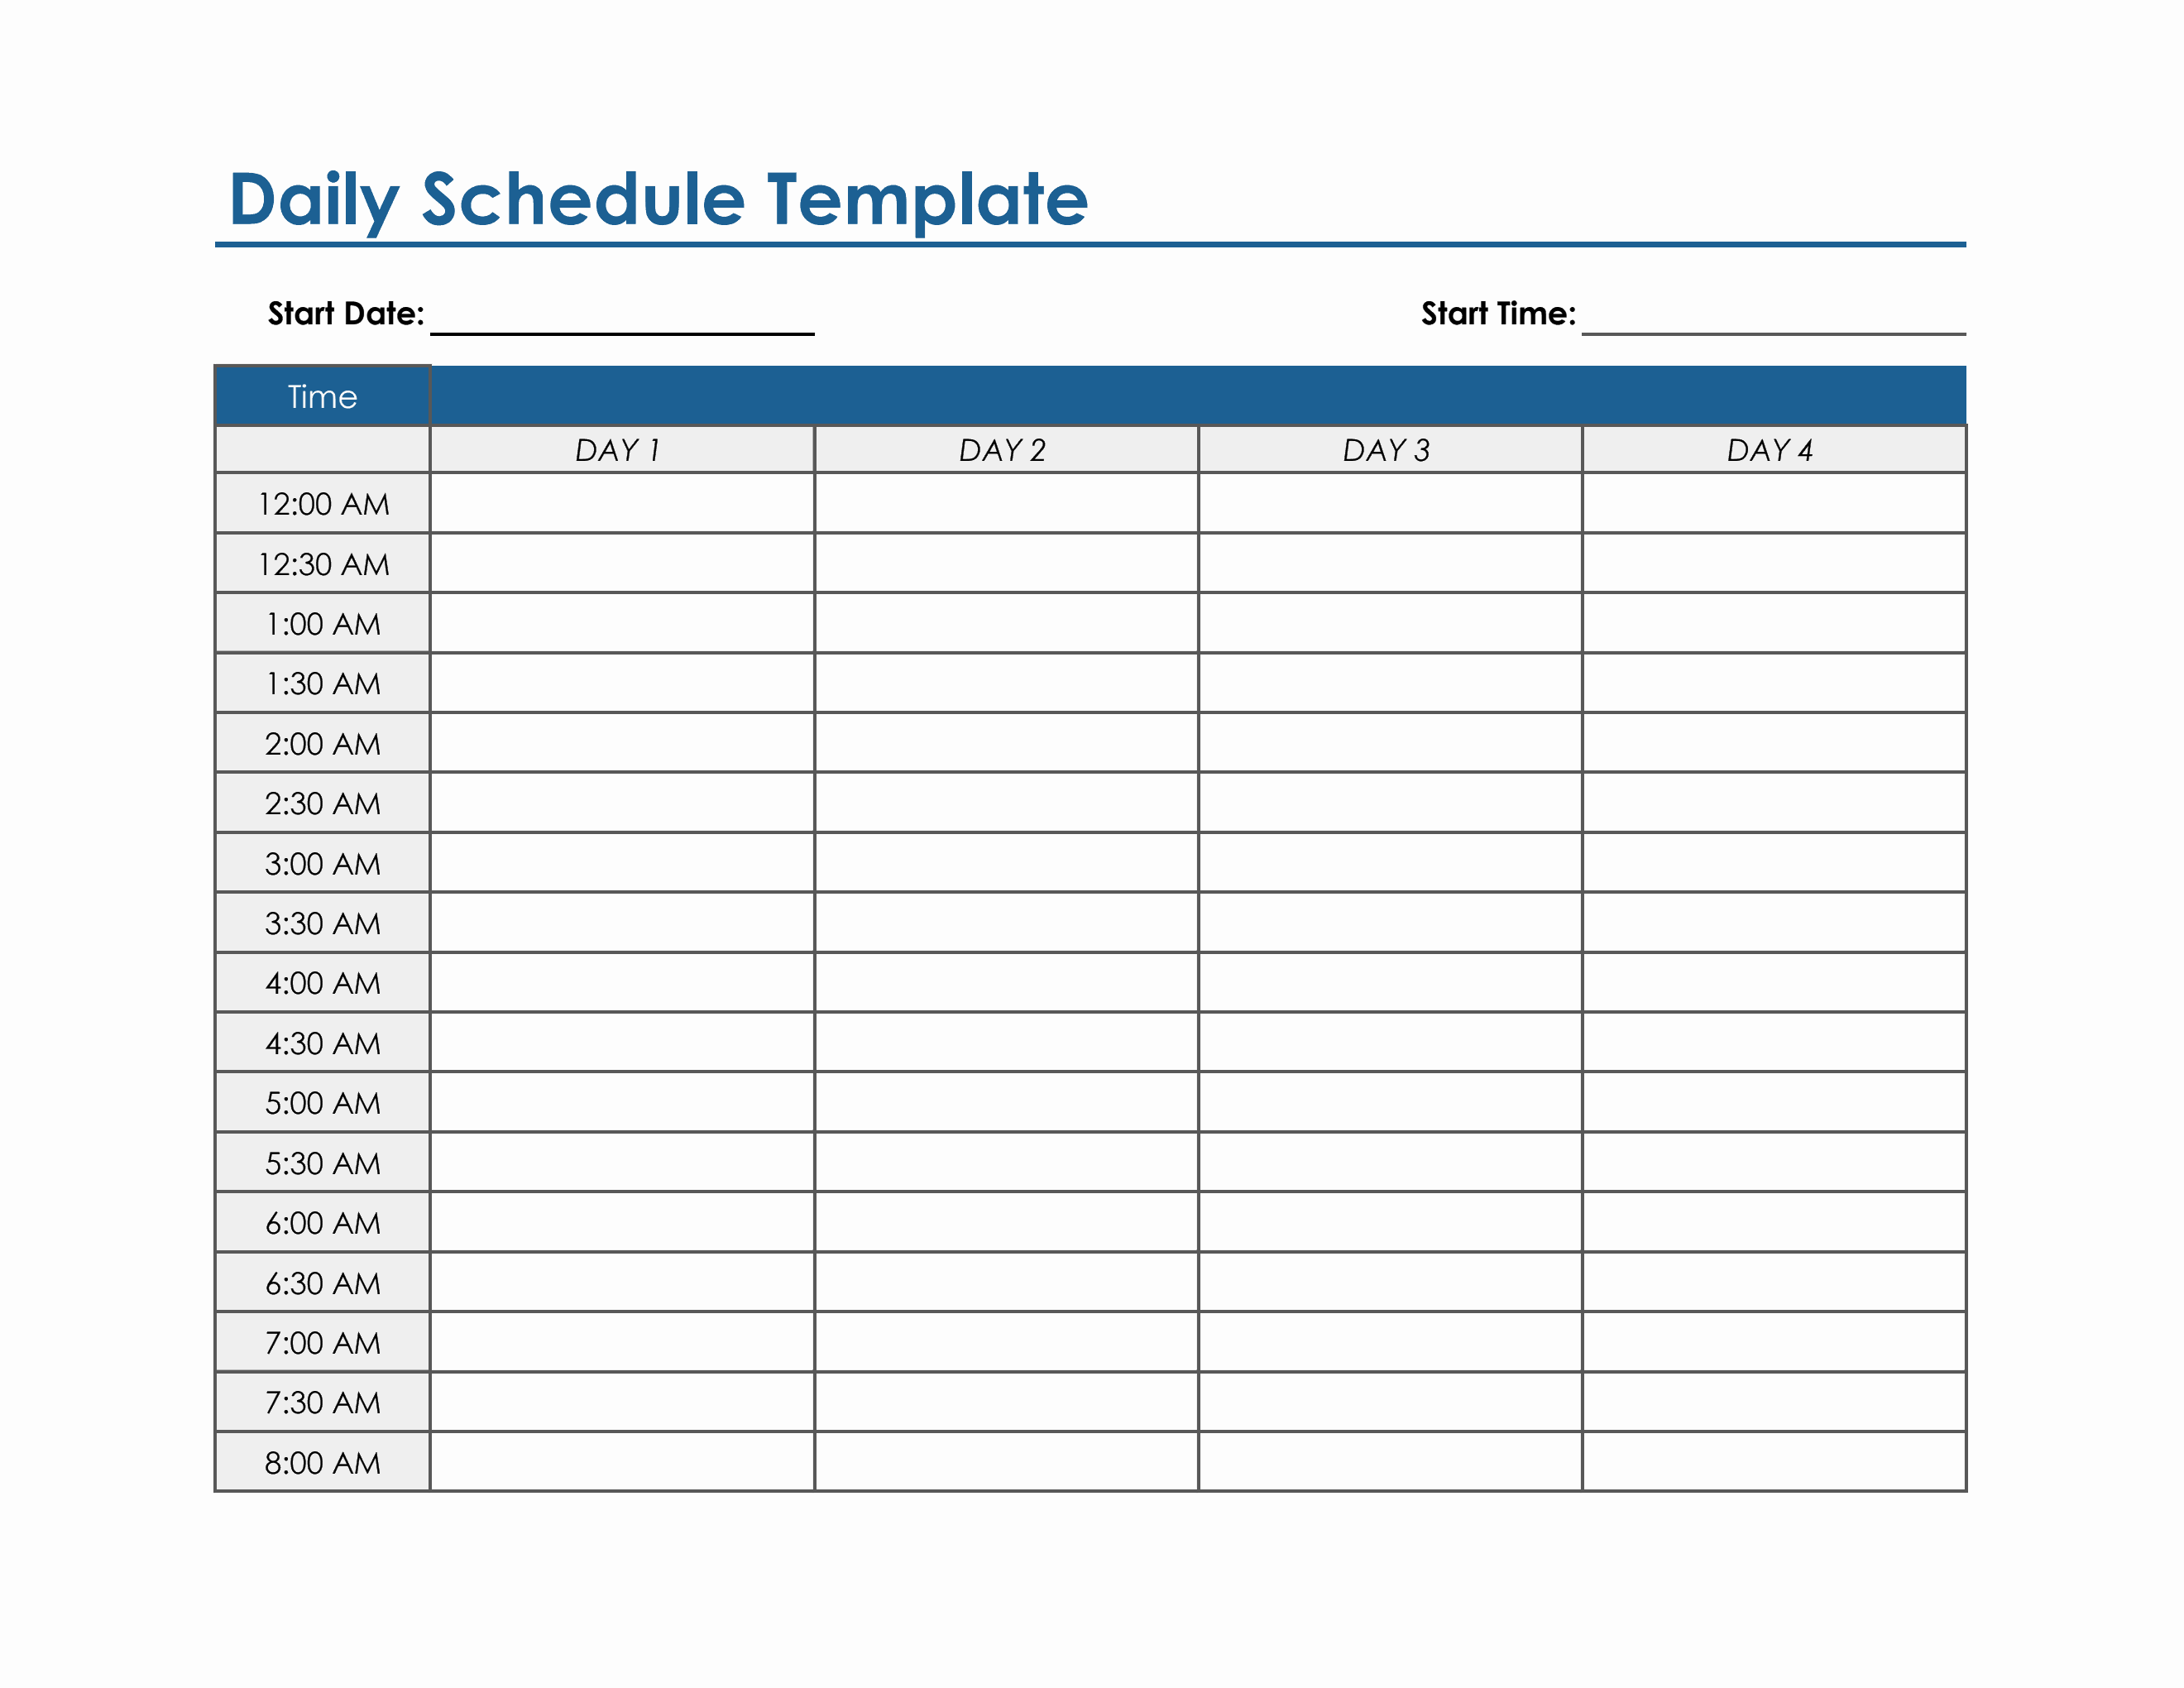 Daily Schedule Template Excel Letter Example Template - Gambaran